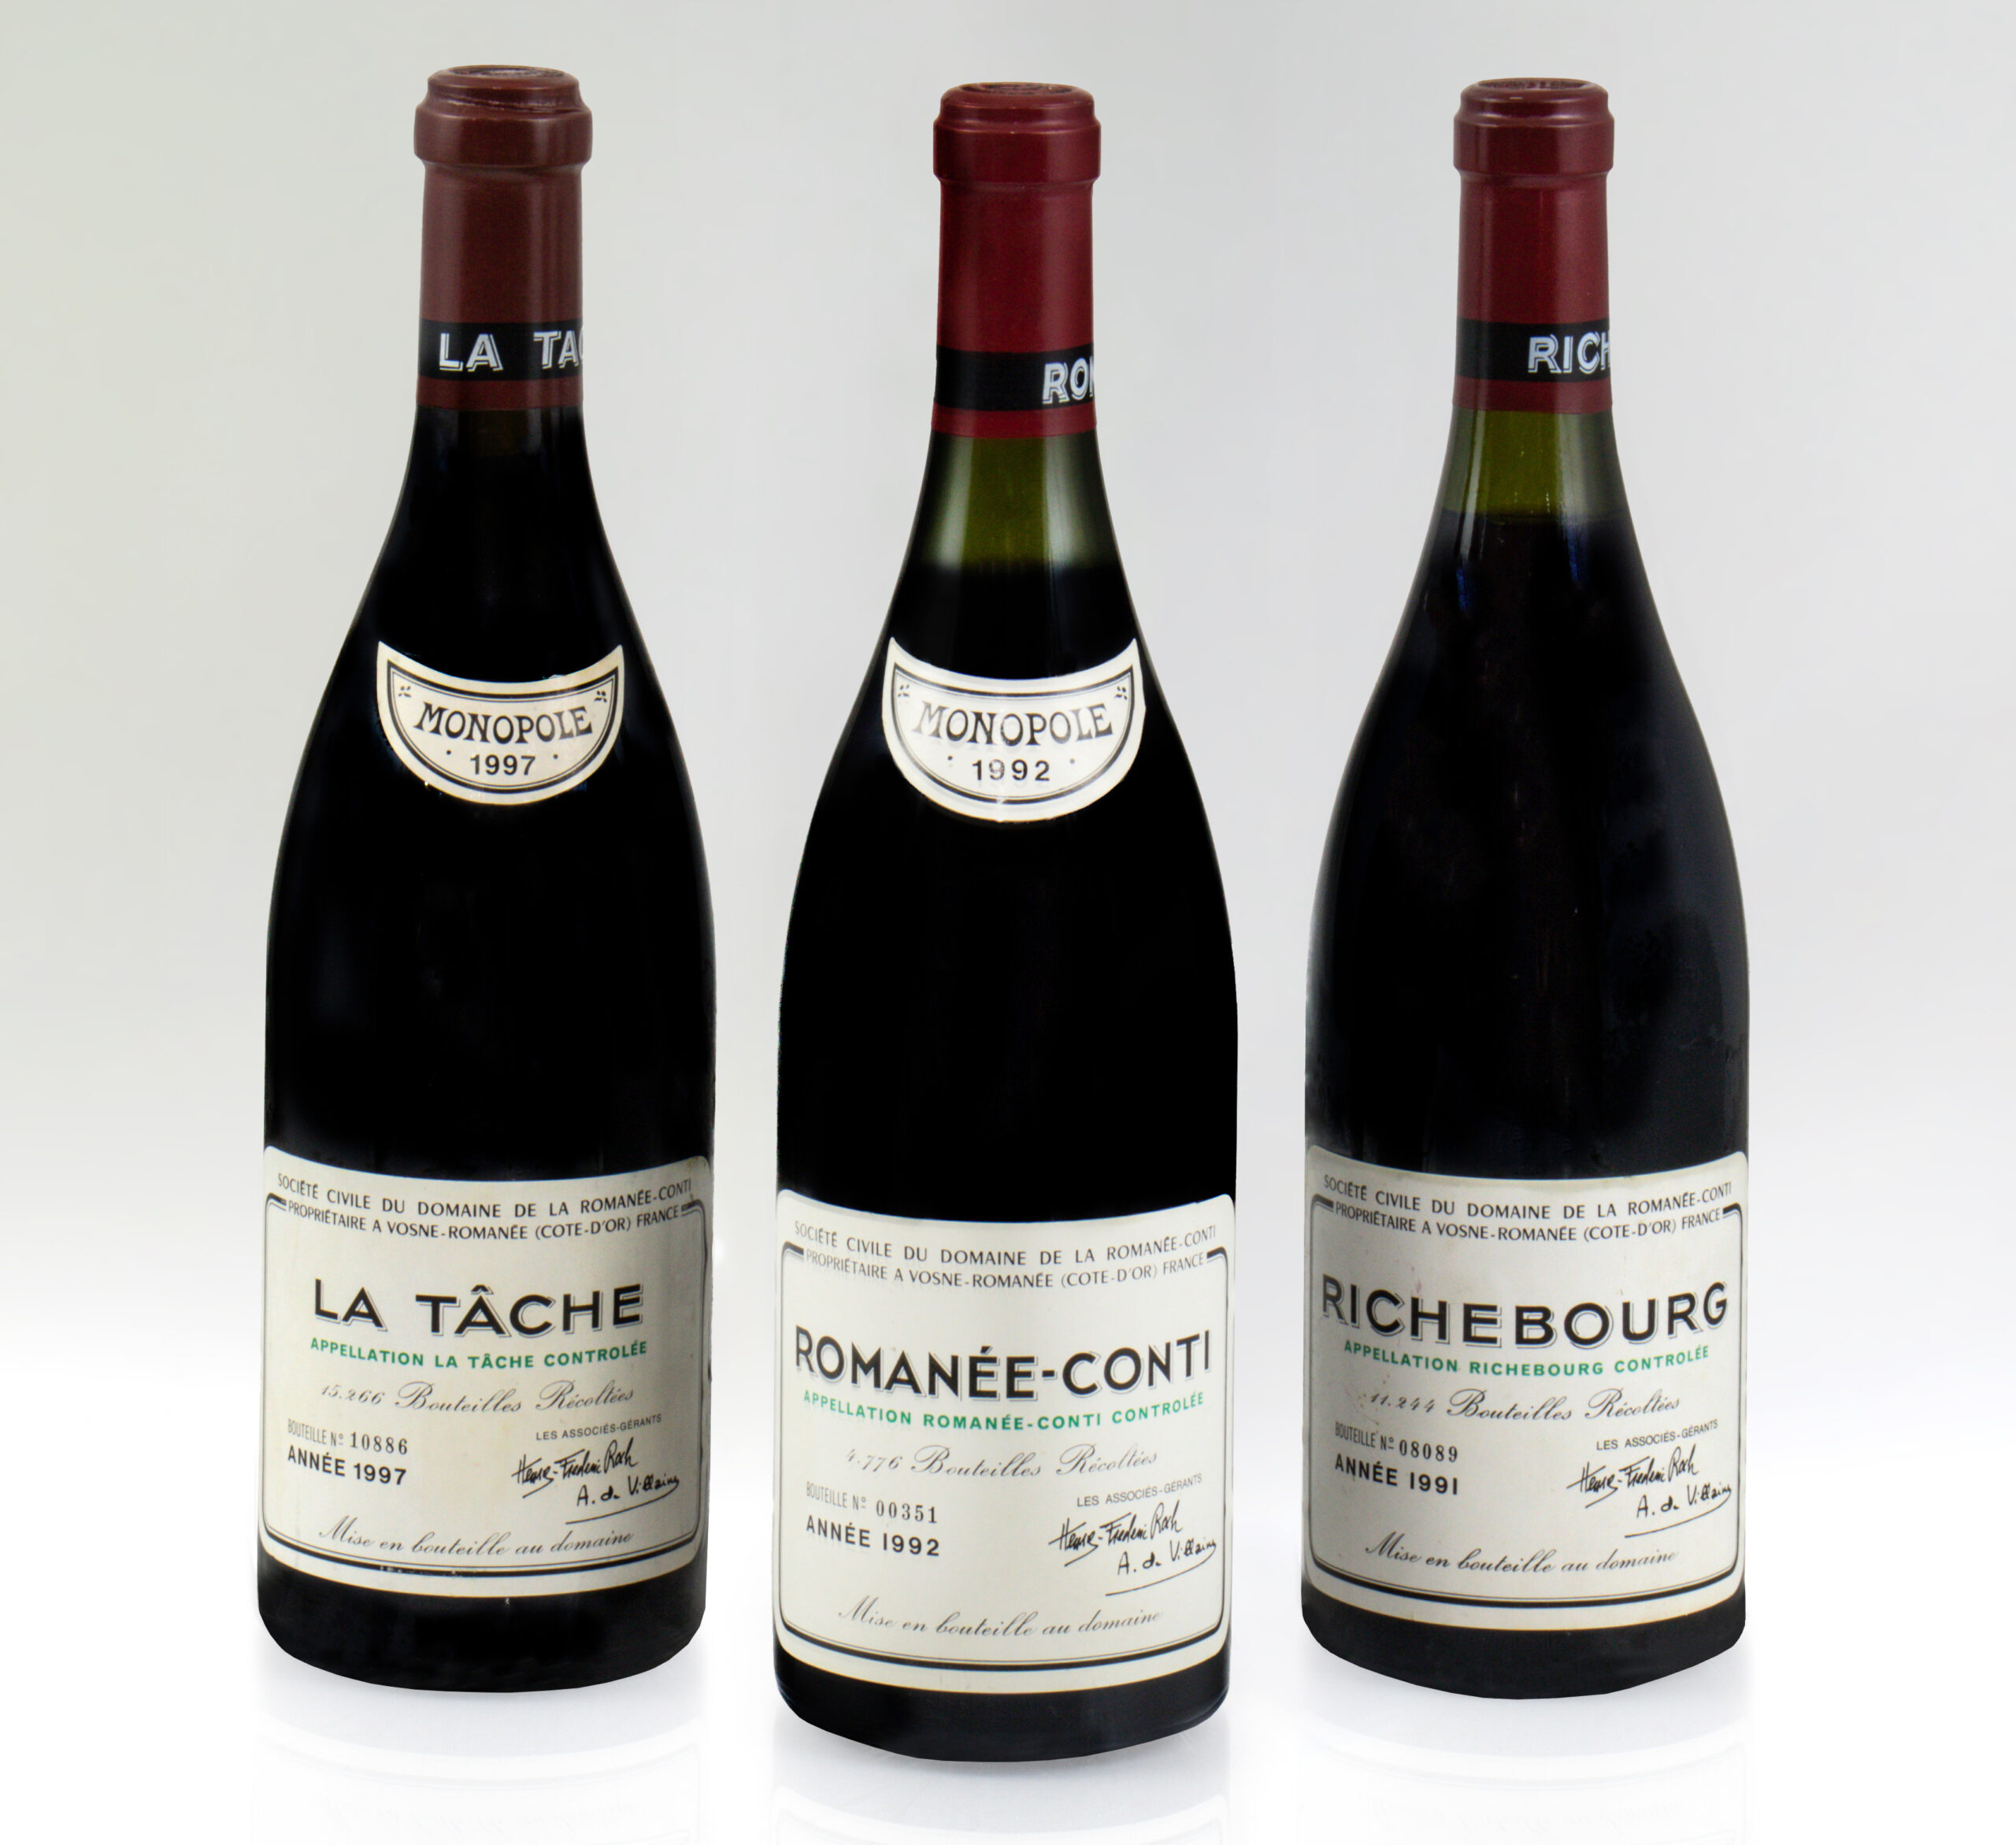 From left to right: 1997 Domaine de la Romanée-Conti La Tâche Grand Cru Monopole; Estimate: $3,000–$5,000. 1992 Domaine de la Romanée-Conti Monopole; Estimate: $3,000–$5,000. 1991 Domaine de la Romanée-Conti Richebourg Grand Cru; Estimate: $4,000–$6,000. The sale will also feature a variety of fine French Bordeaux, Châteauneuf-du-Papes, and Burgundies from the 1960s, 1970s, 1980s, 1990s and early 2000s.